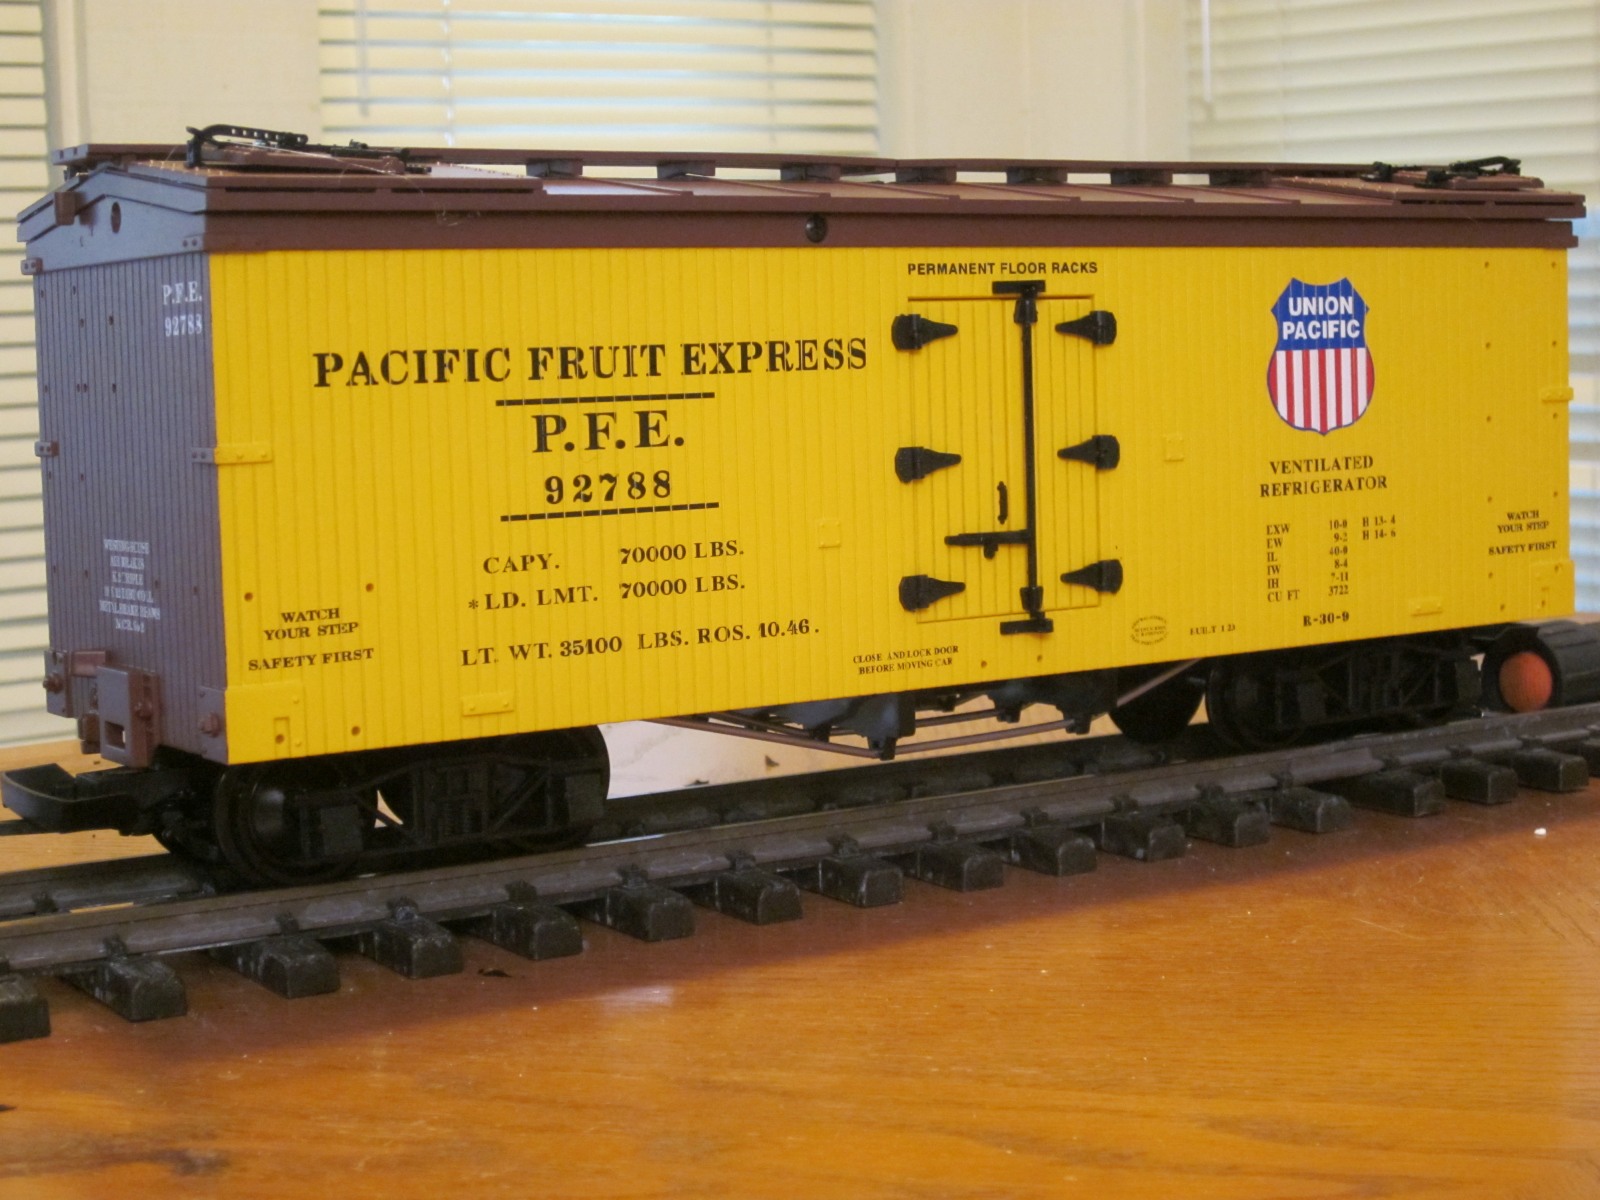 R16295 Union Pacific Pacific Fruit Express PFE 92788